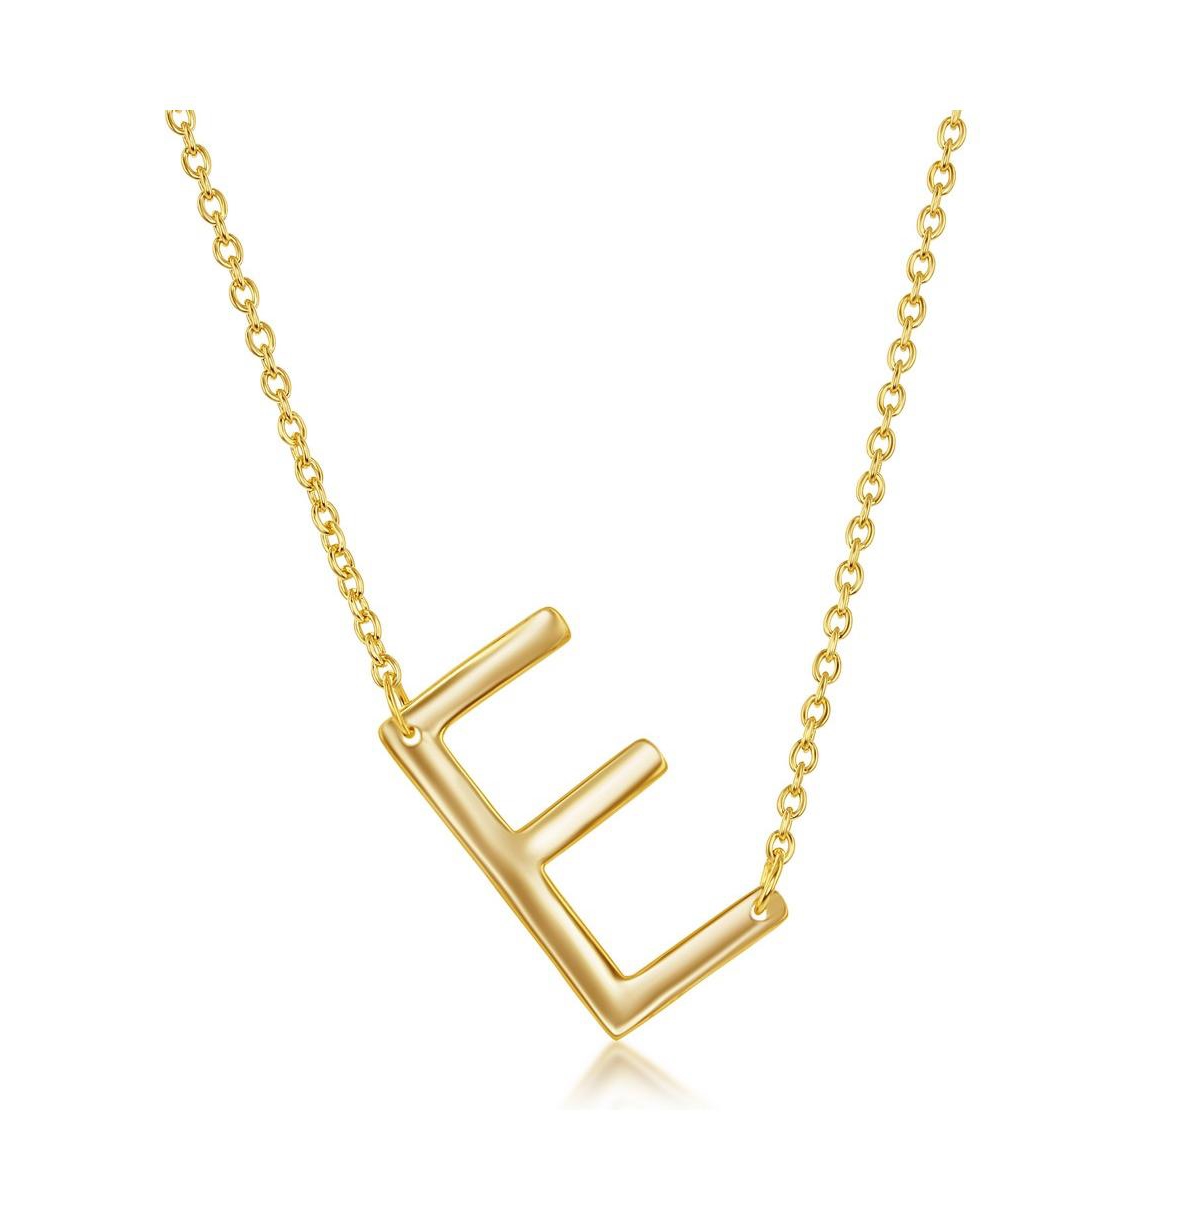 Gold Tone Sideways Initial Necklace - Gold e